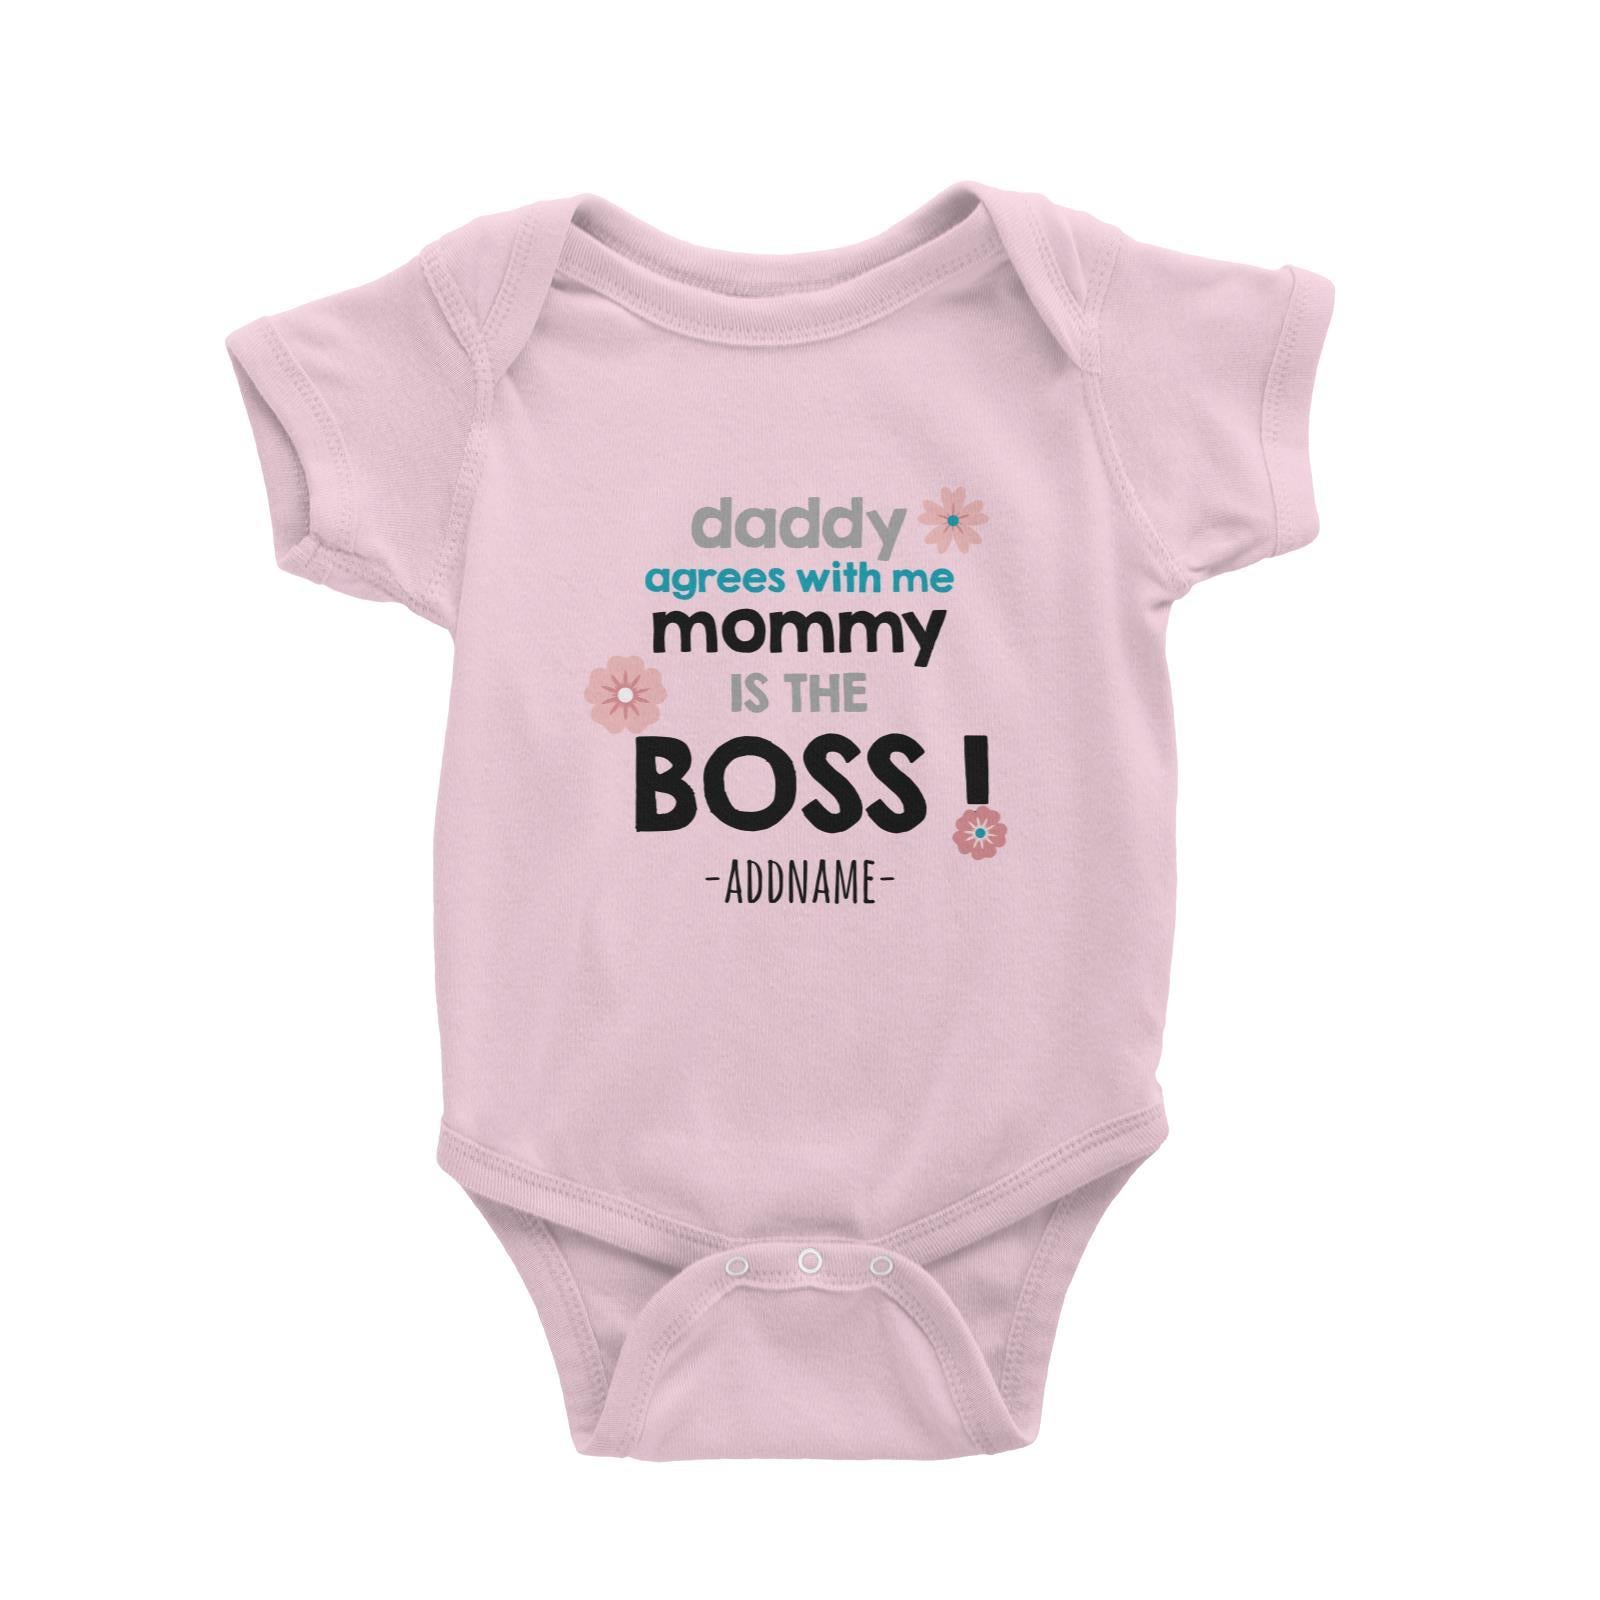 Daddy Agrees with Me Mommy is the Boss Addname Baby Romper Personalizable Designs Basic Newborn